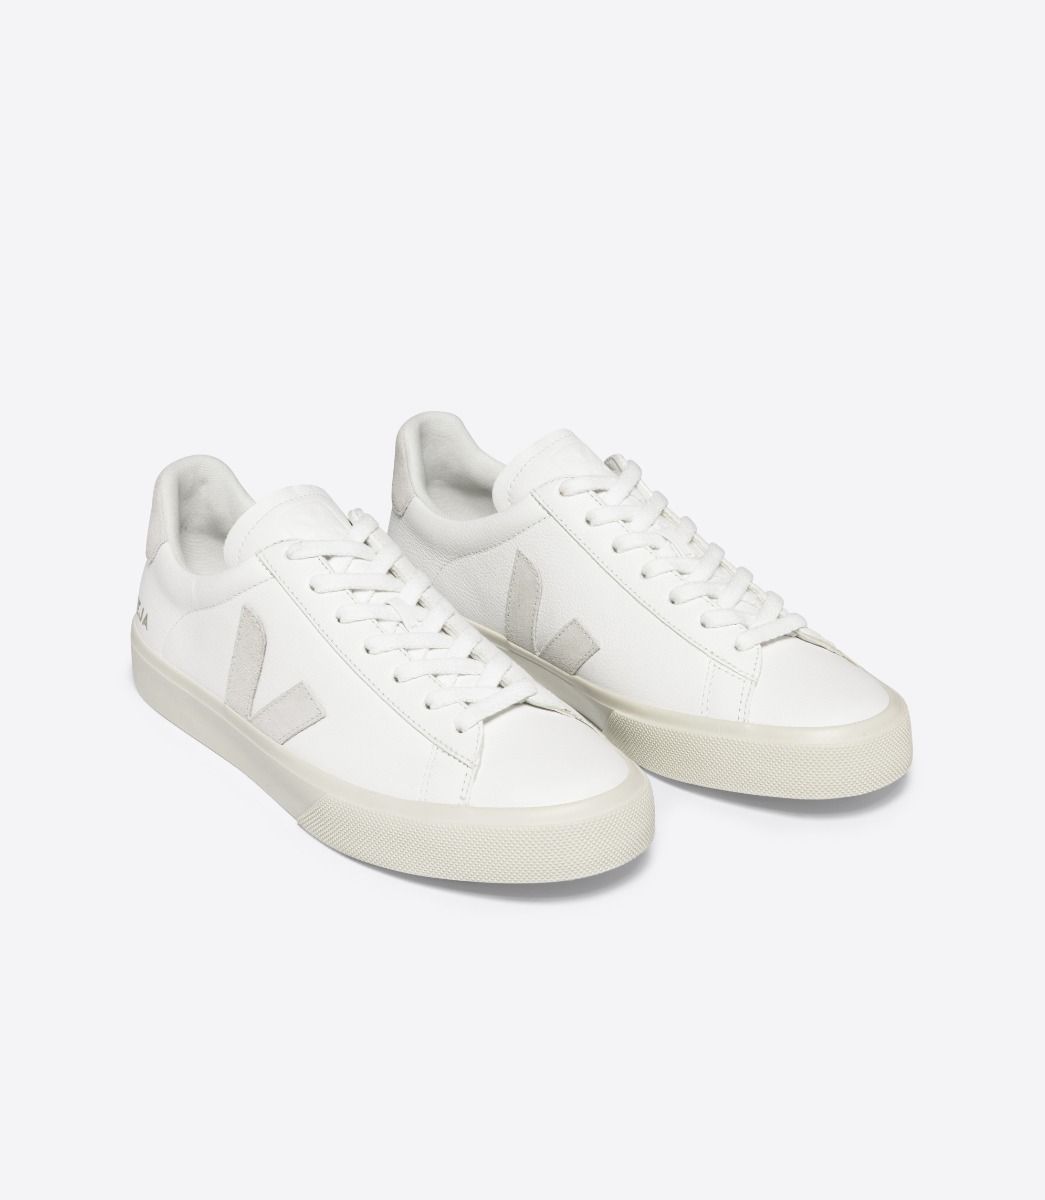 CAMPO CHROMEFREE LEATHER - EXTRA WHITE NATURAL  SUEDE - VEJA